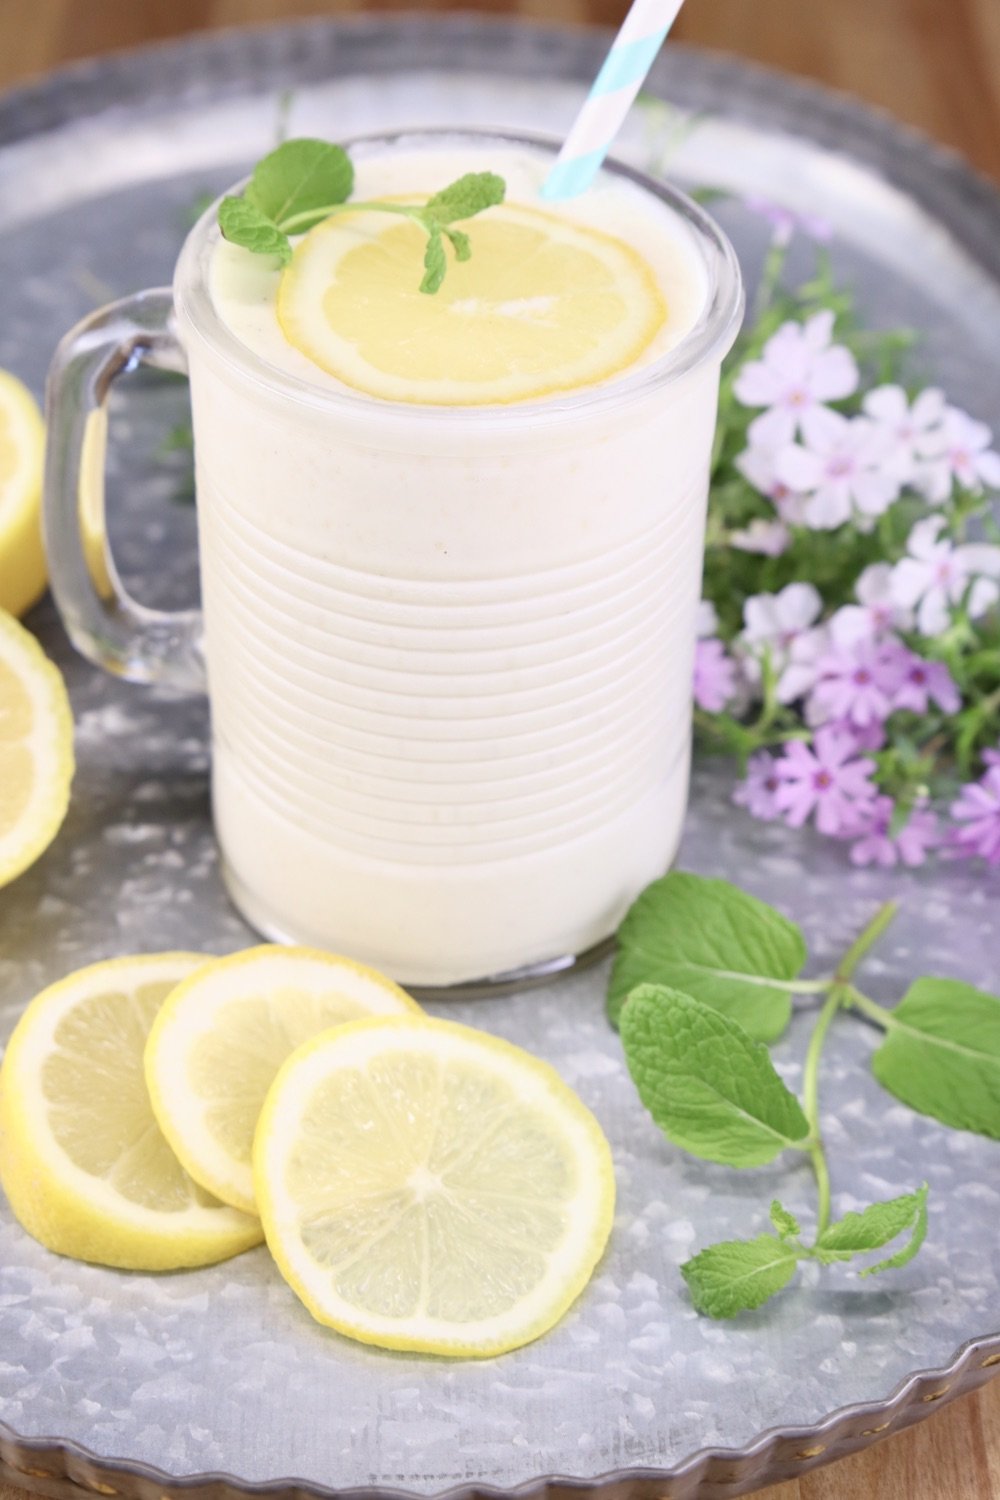 Frosted pineapple lemonade in a glass with lemon and a straw. Sitting on a tray with lemon slices, fresh flowers